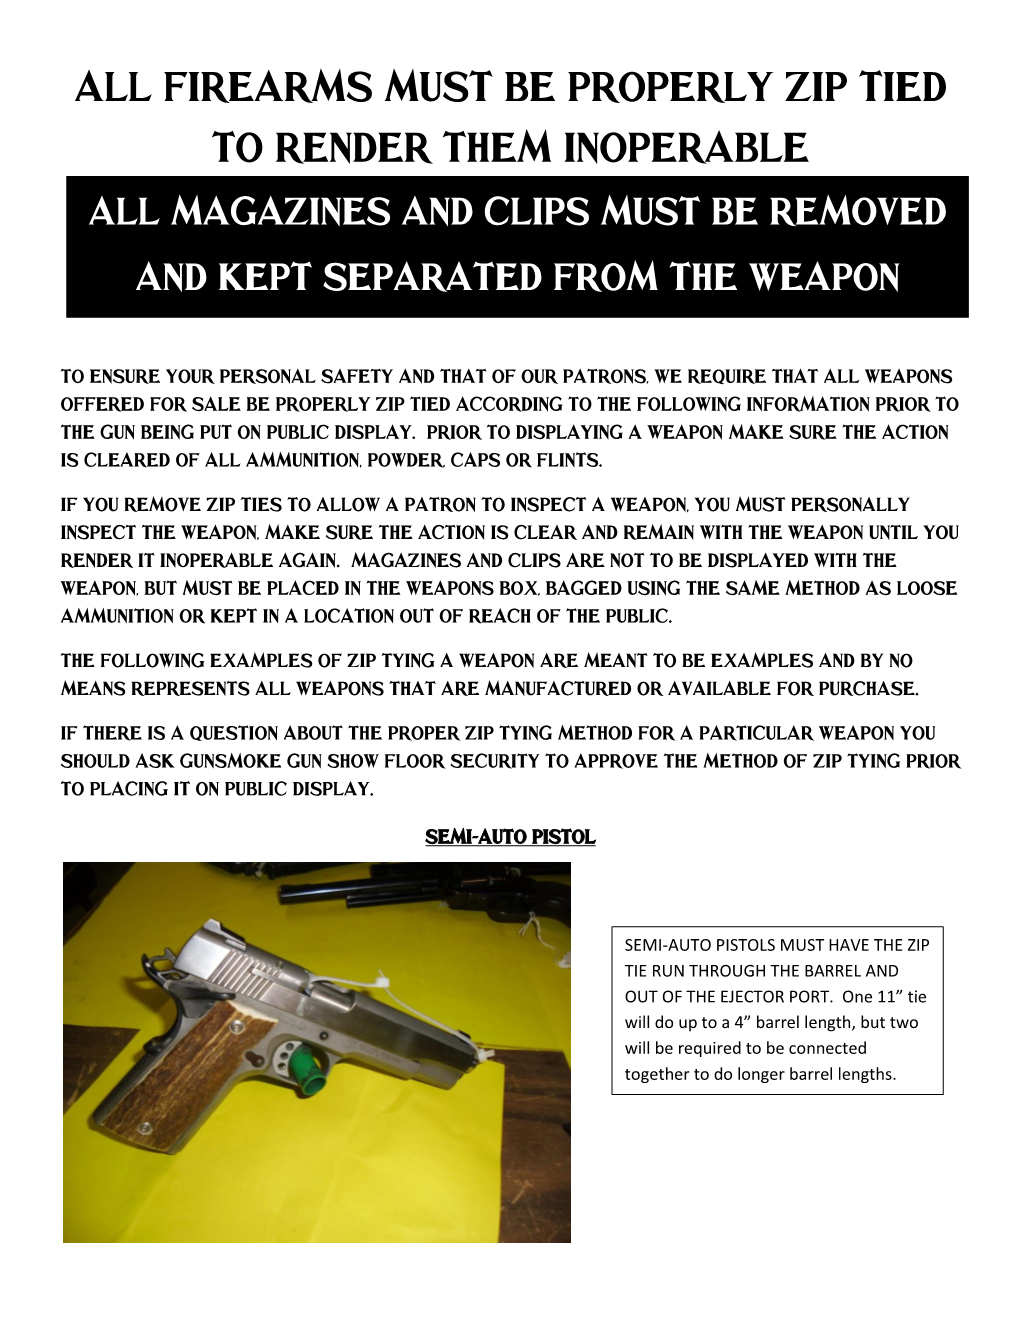 Firearms Must Be Properly Zip Tied to Render Them Inoperable All Magazines and Clips Must Be Removed